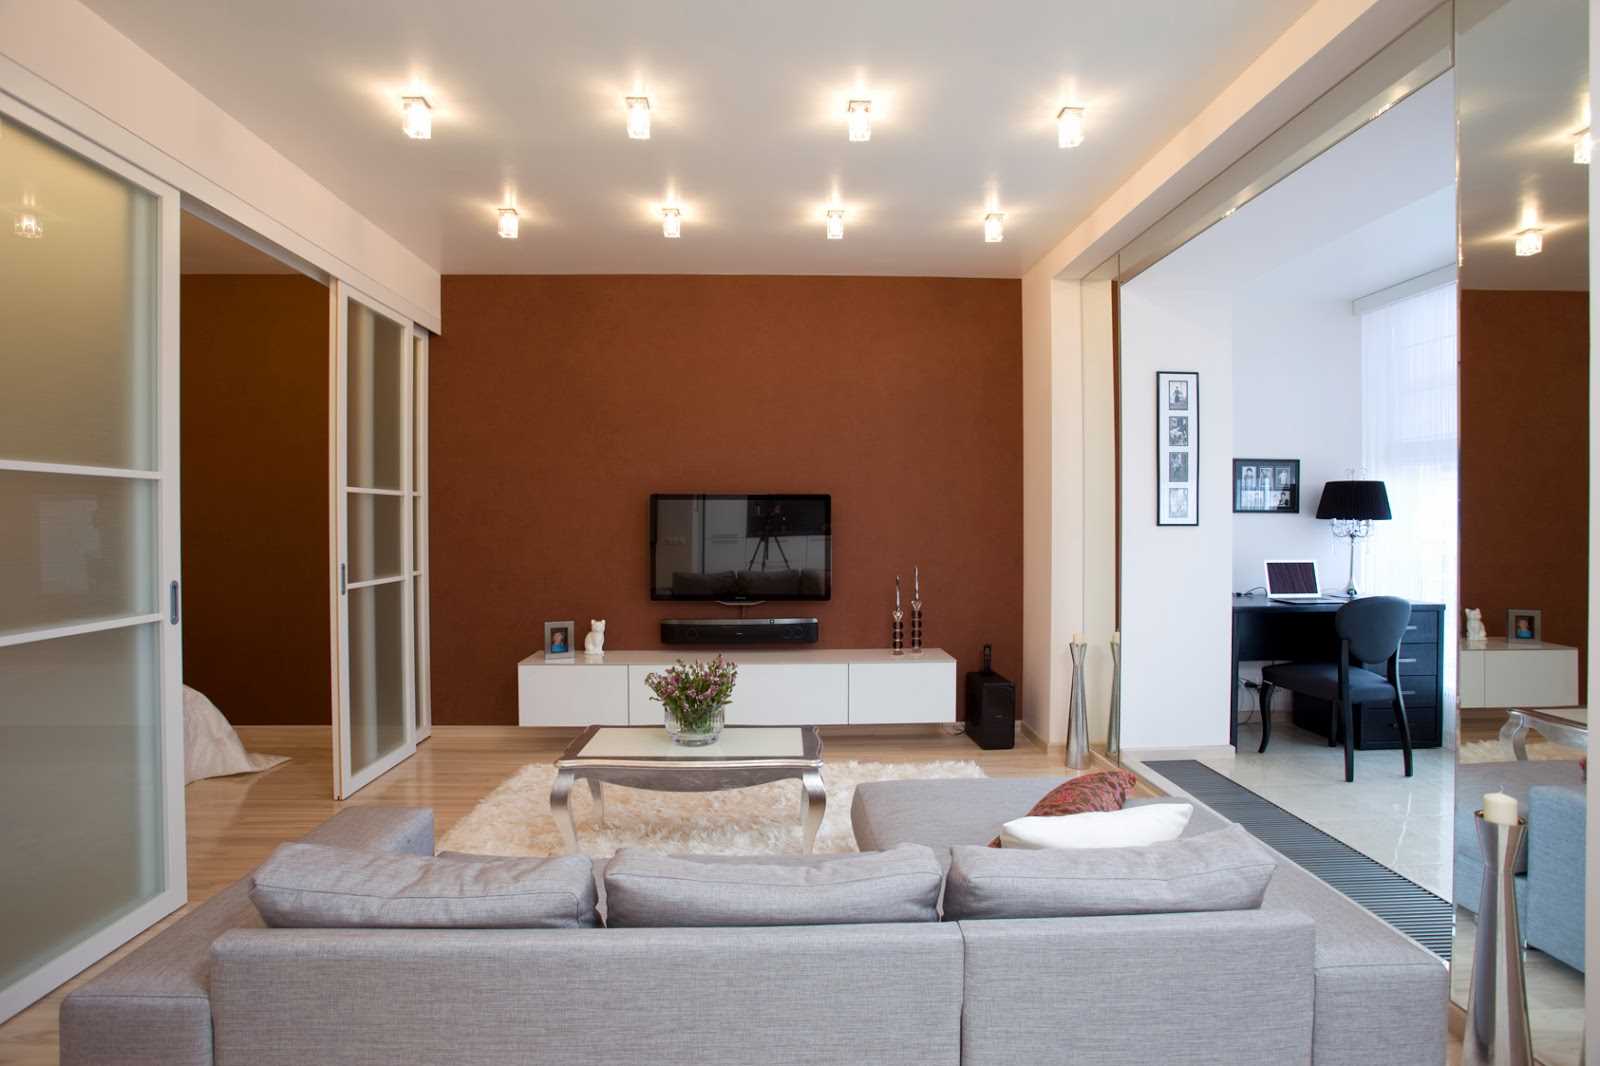 example of an unusual interior of a modern apartment of 50 sq.m